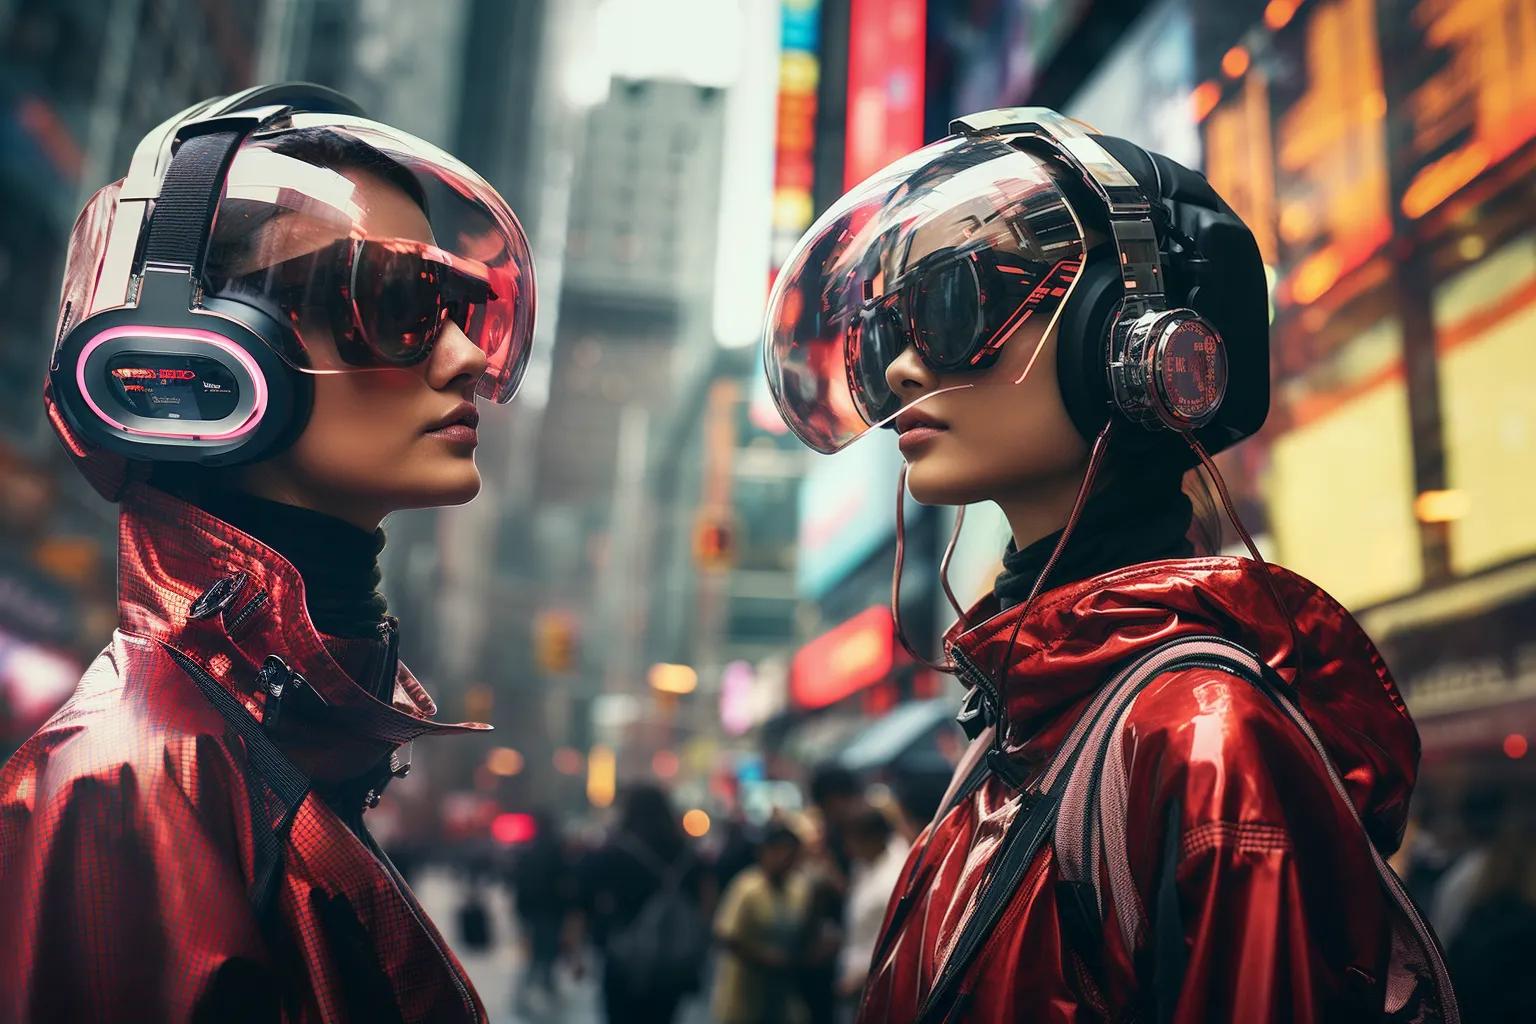 Future of techno culture: how it will look like?